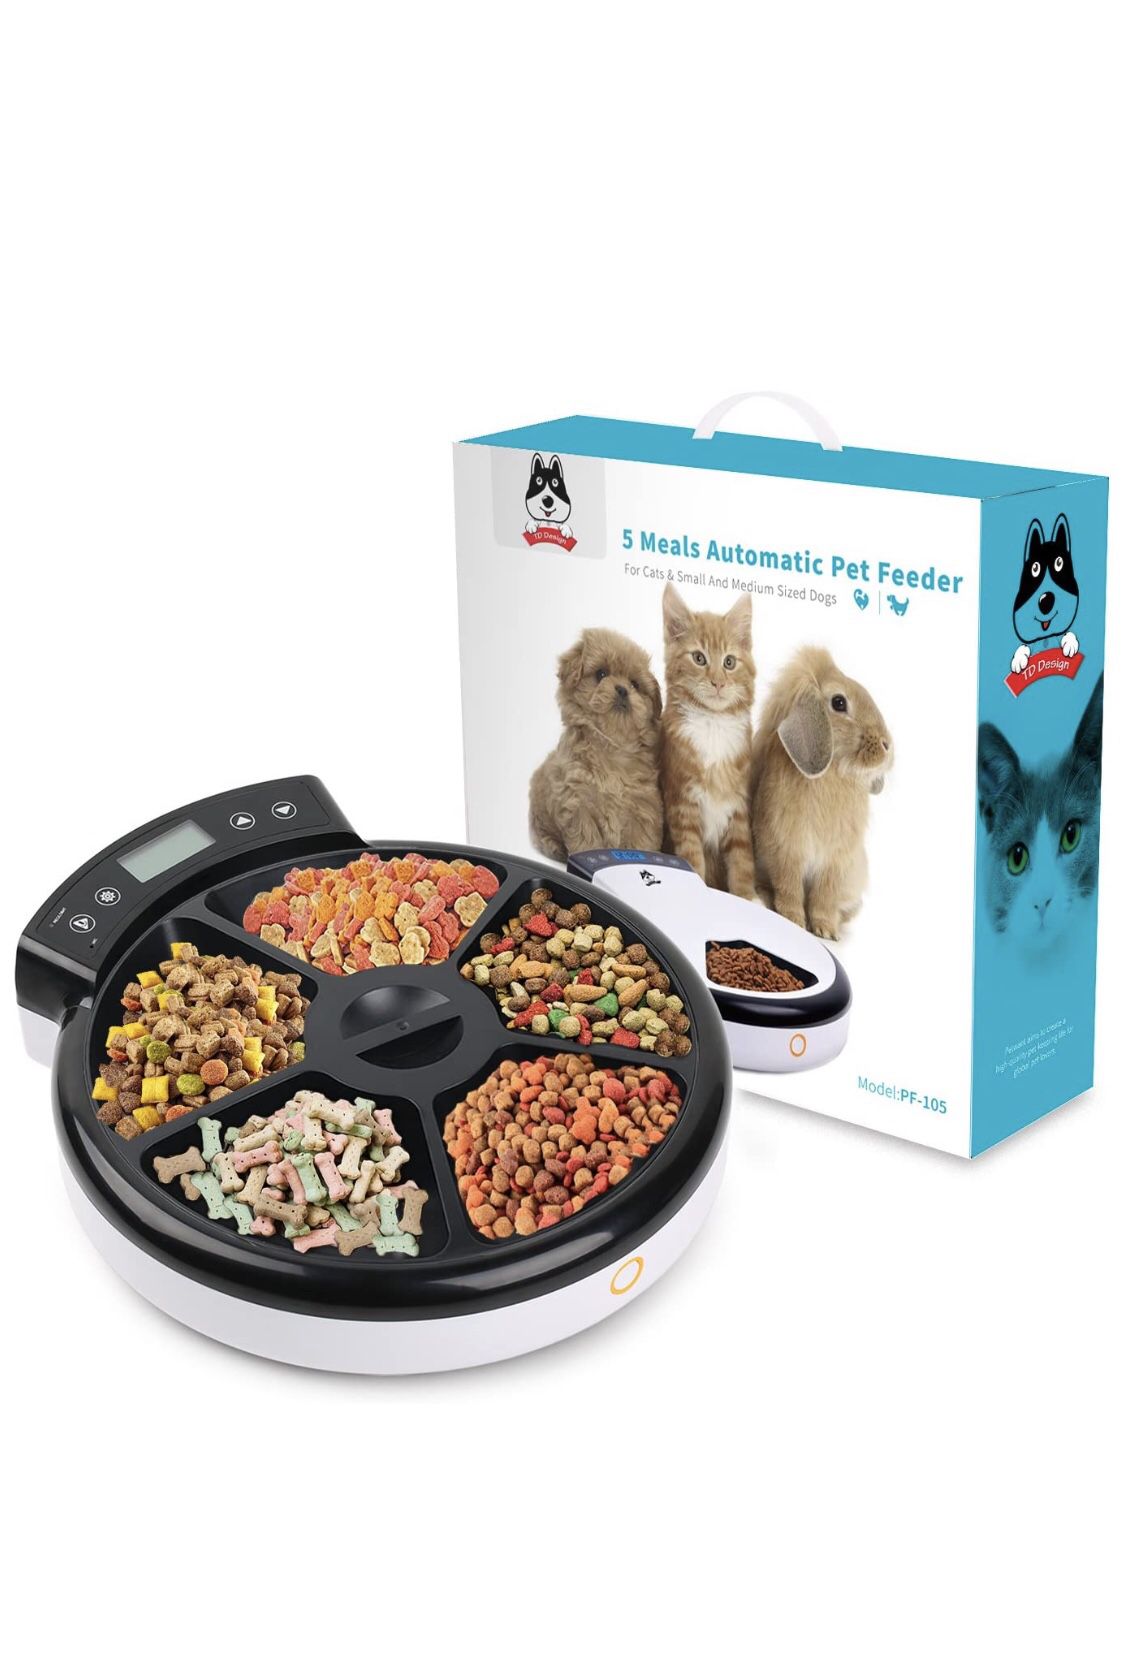 Brand New Automatic Pet Feeder Cat Feeder for Dogs & Cats